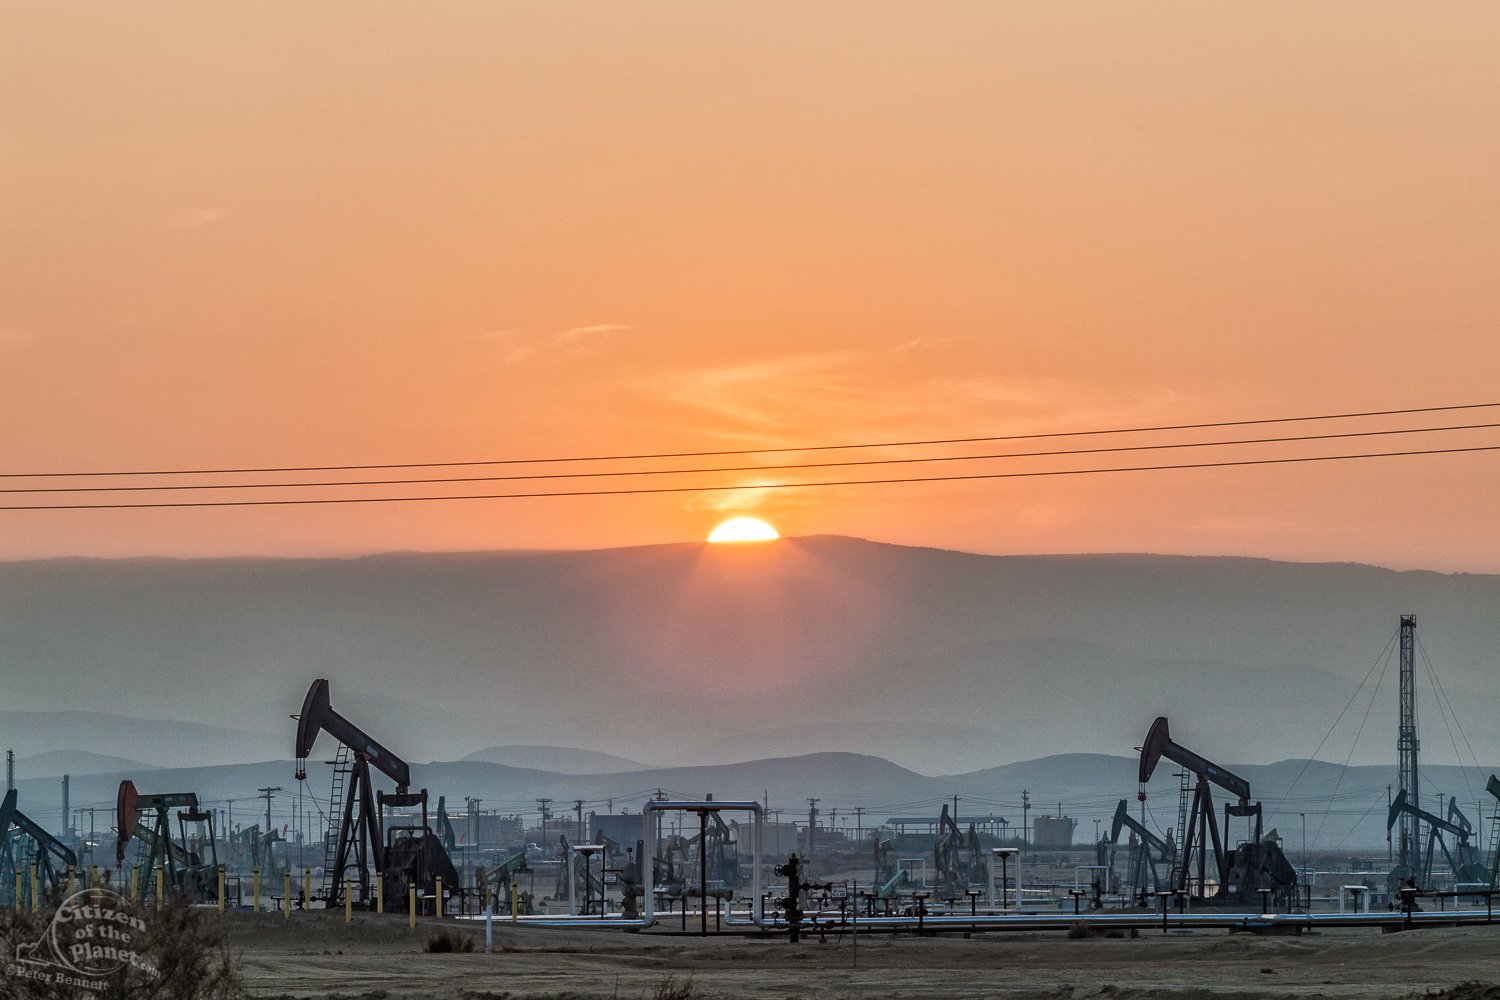  Belridge Oil Field and hydraulic fracking site is the fourth largest oil field in California. 